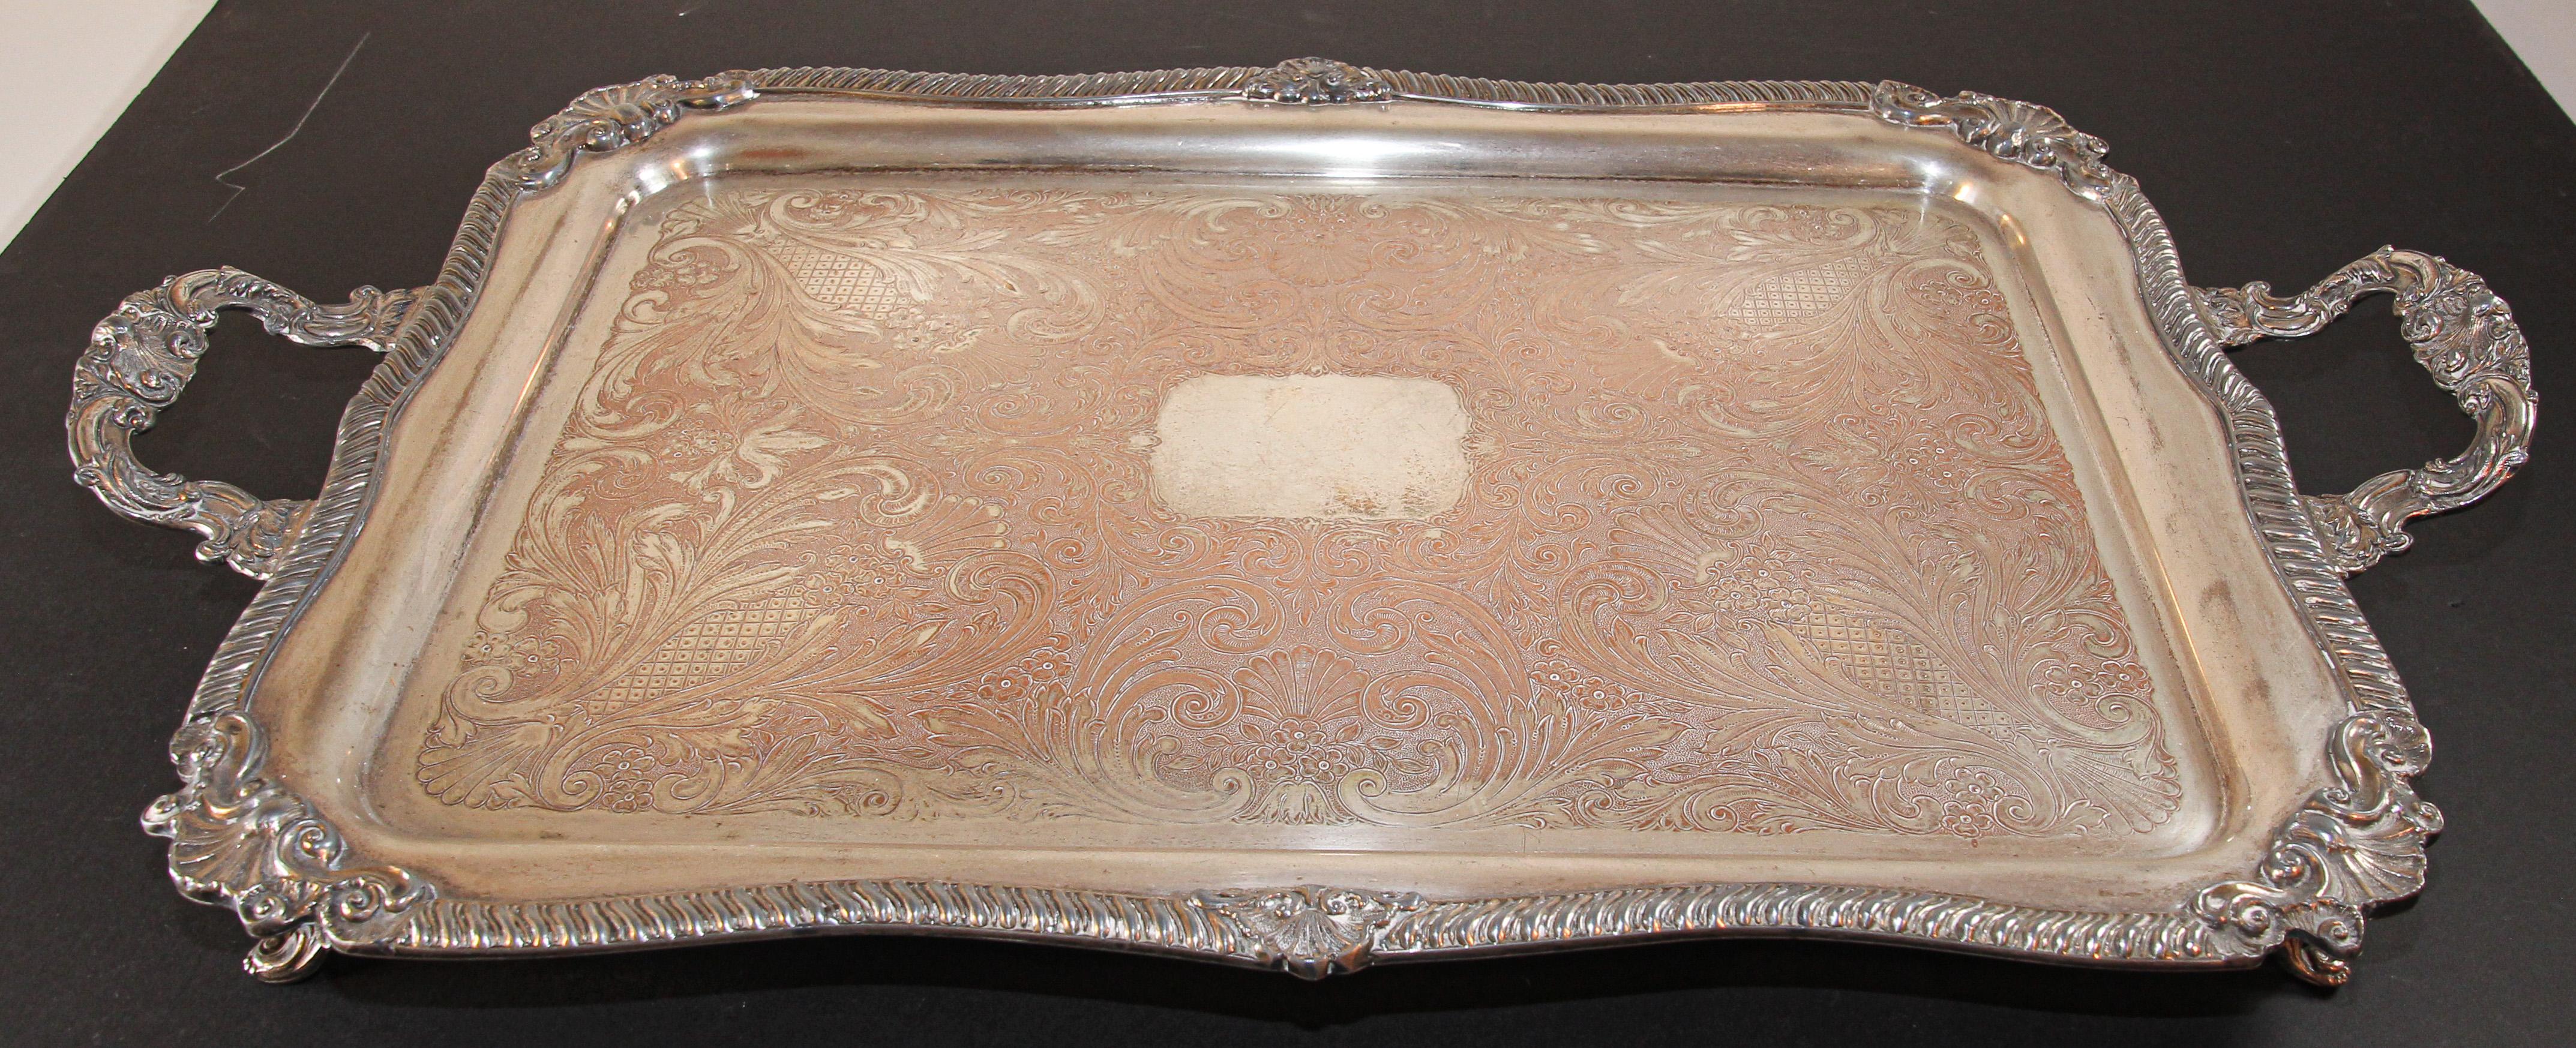 Vintage Large Silver Plate Tray George IV English Style For Sale 12